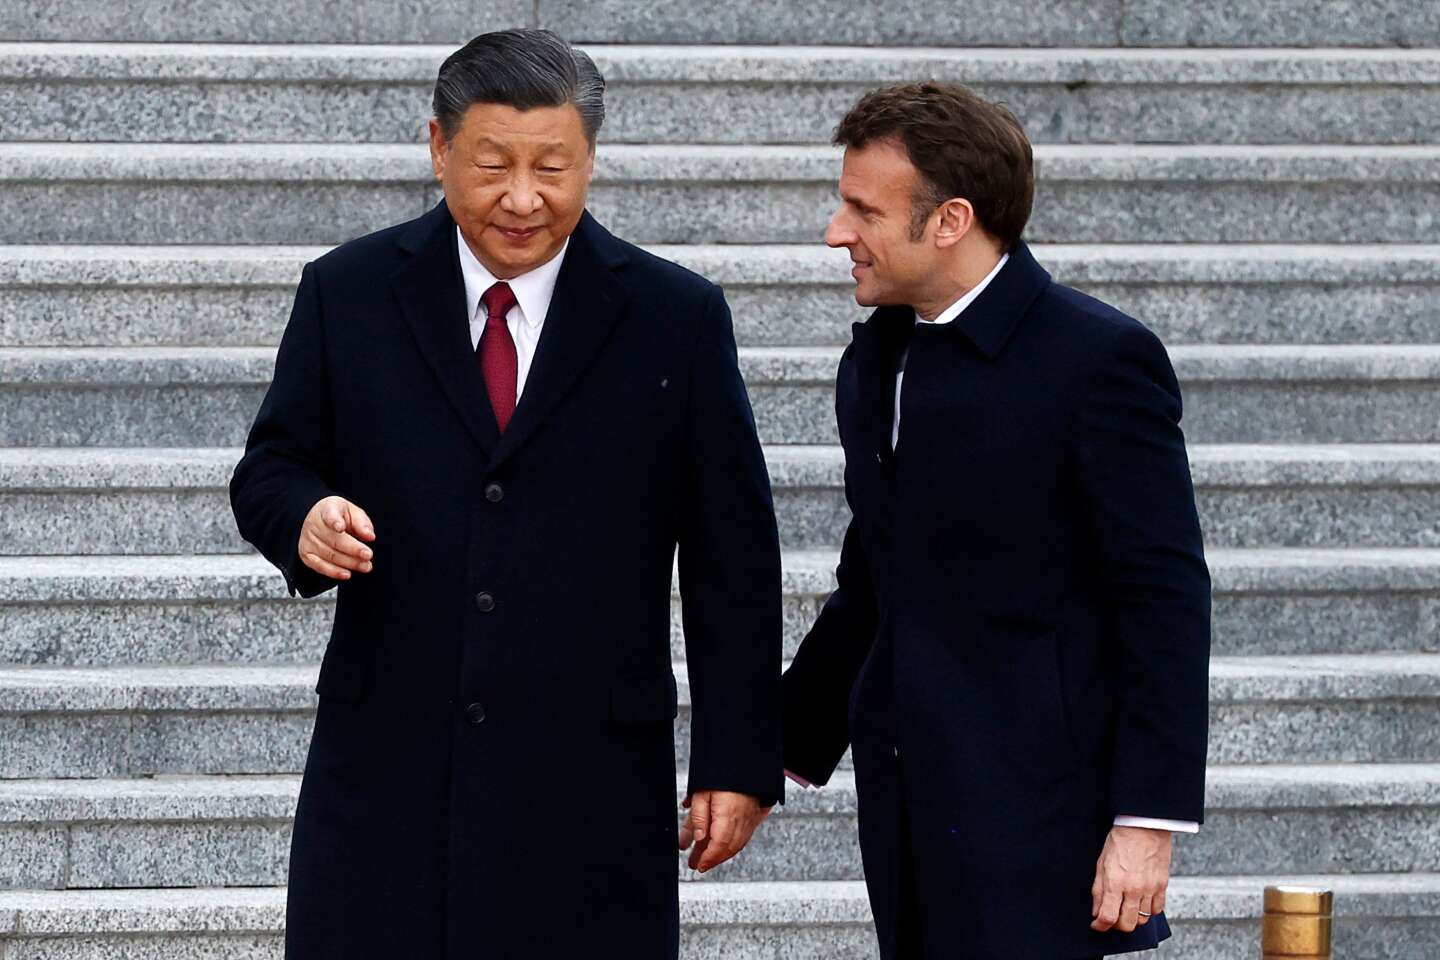 Xi Jinping state visit to France on May 6 and 7, Ukraine on the agenda of his meeting with Emmanuel Macron